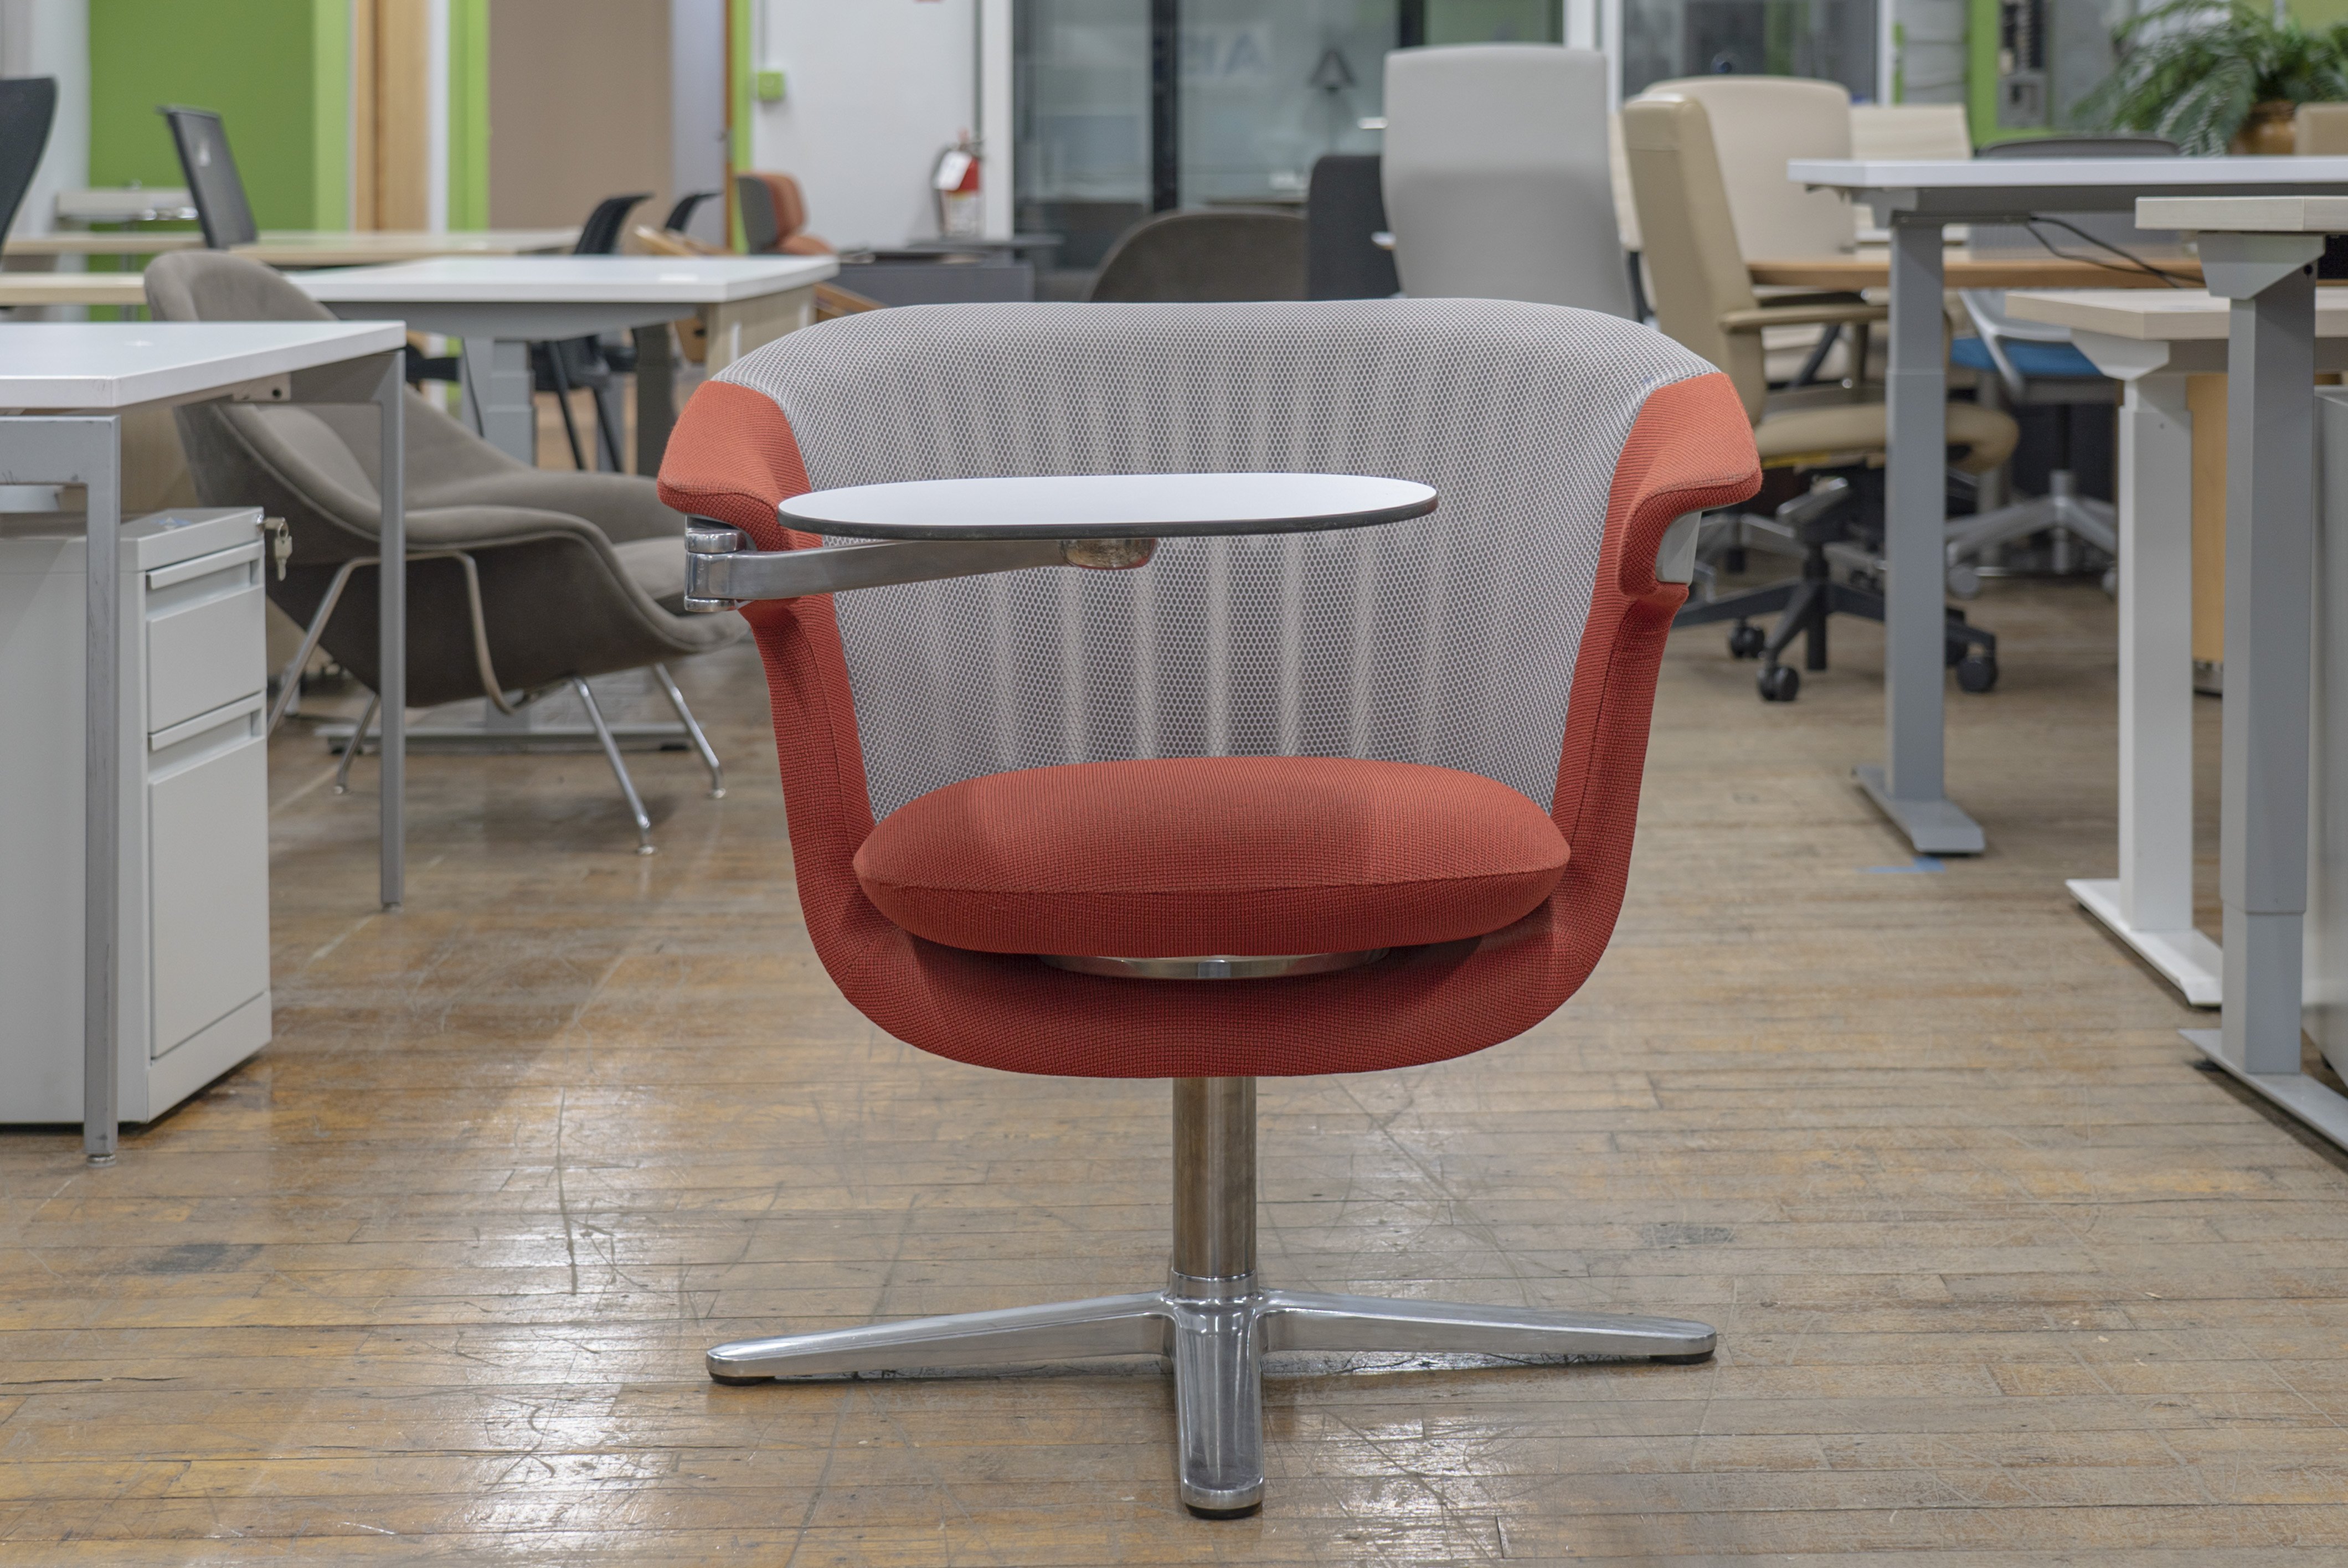 steelcase-i2i-swivel-lounge-chairs-with-tablet